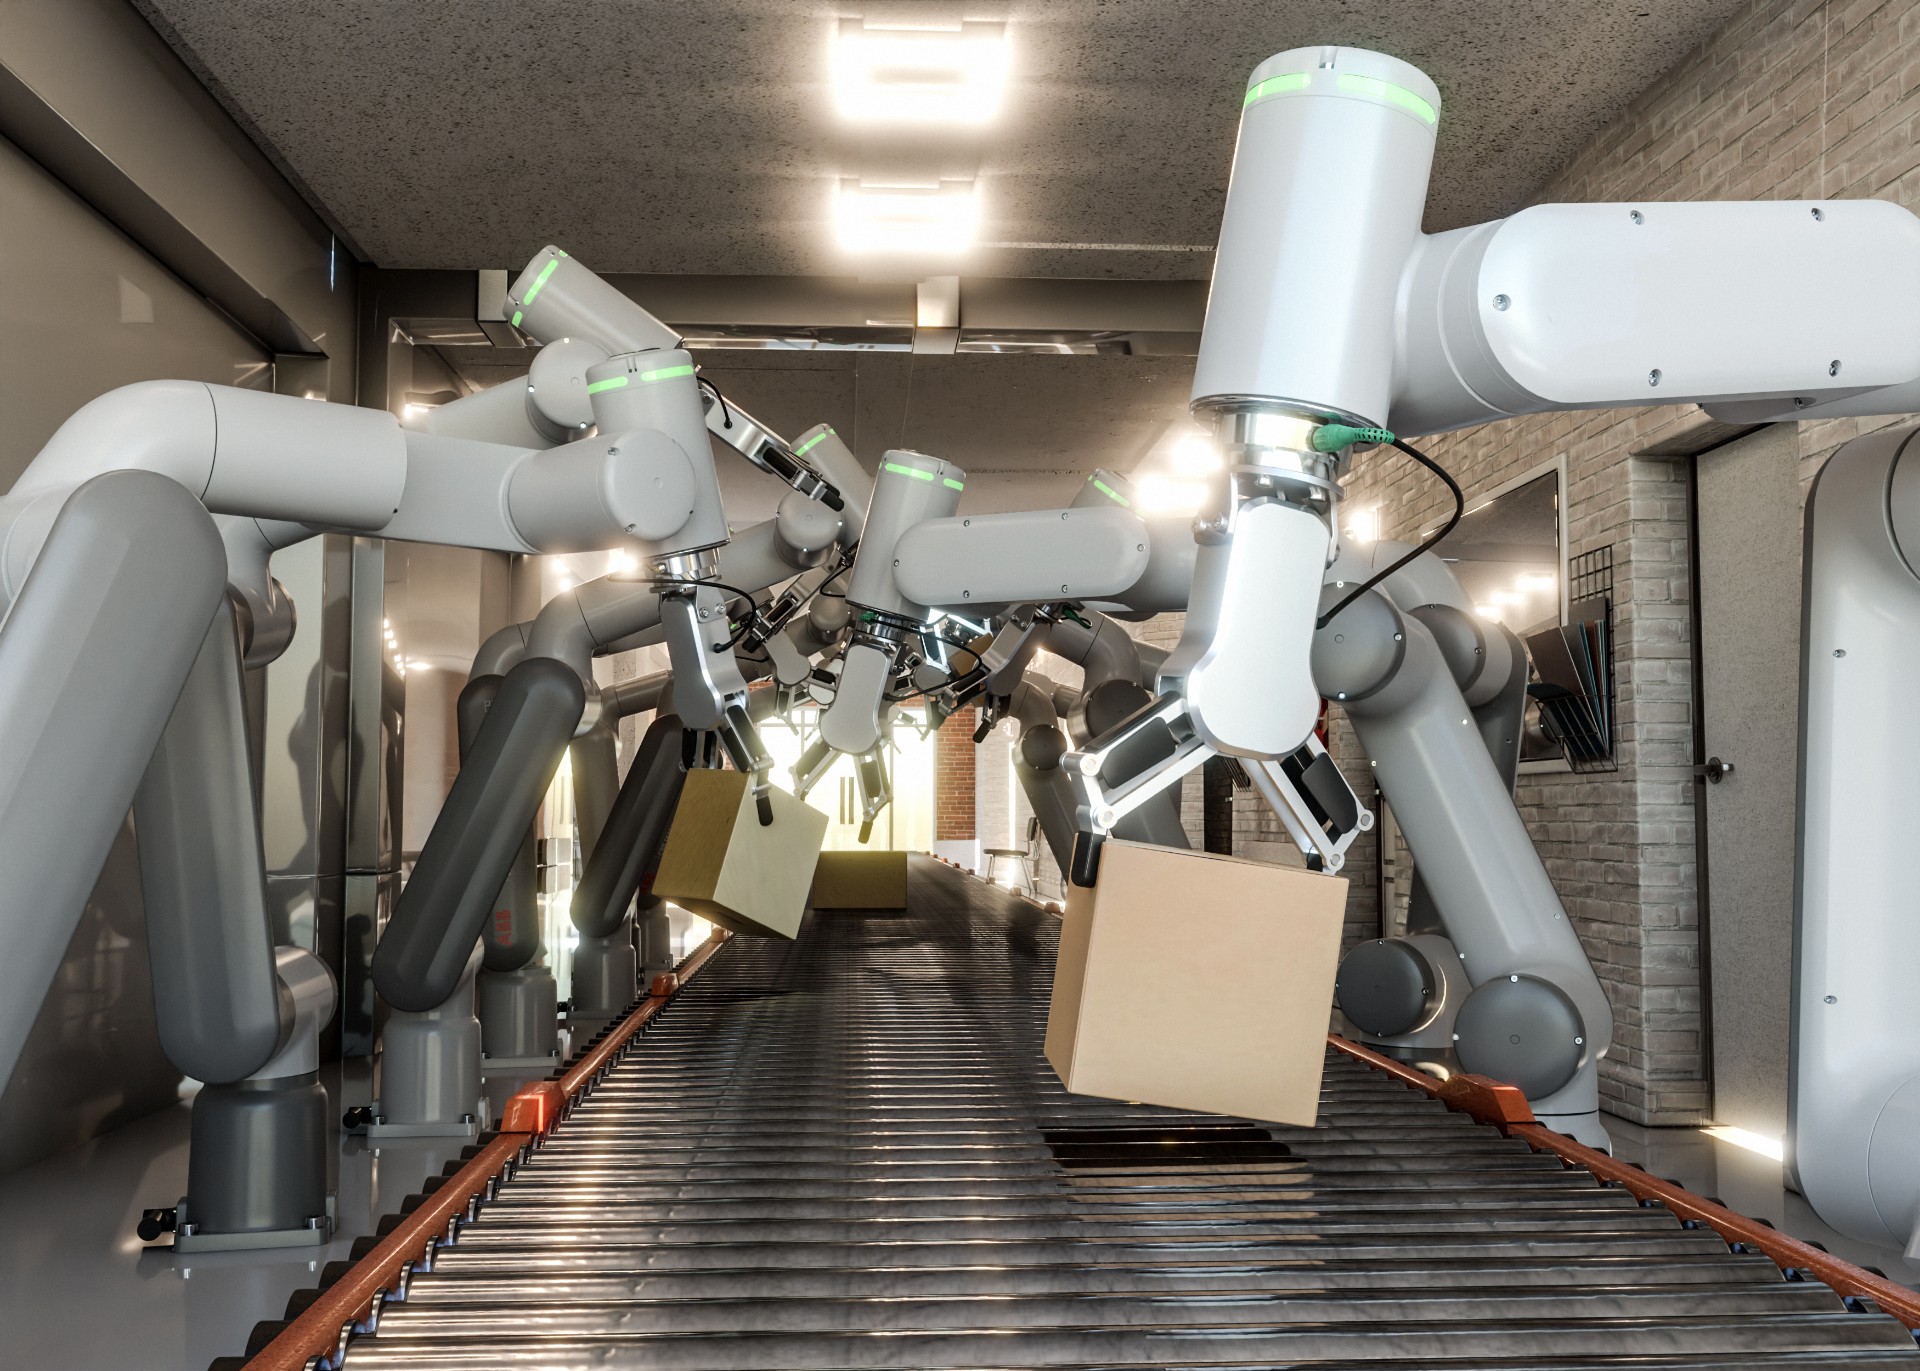 A growing number of firms are looking to artificial intelligence (AI) to improve labor productivity and solve problems that can be automated.